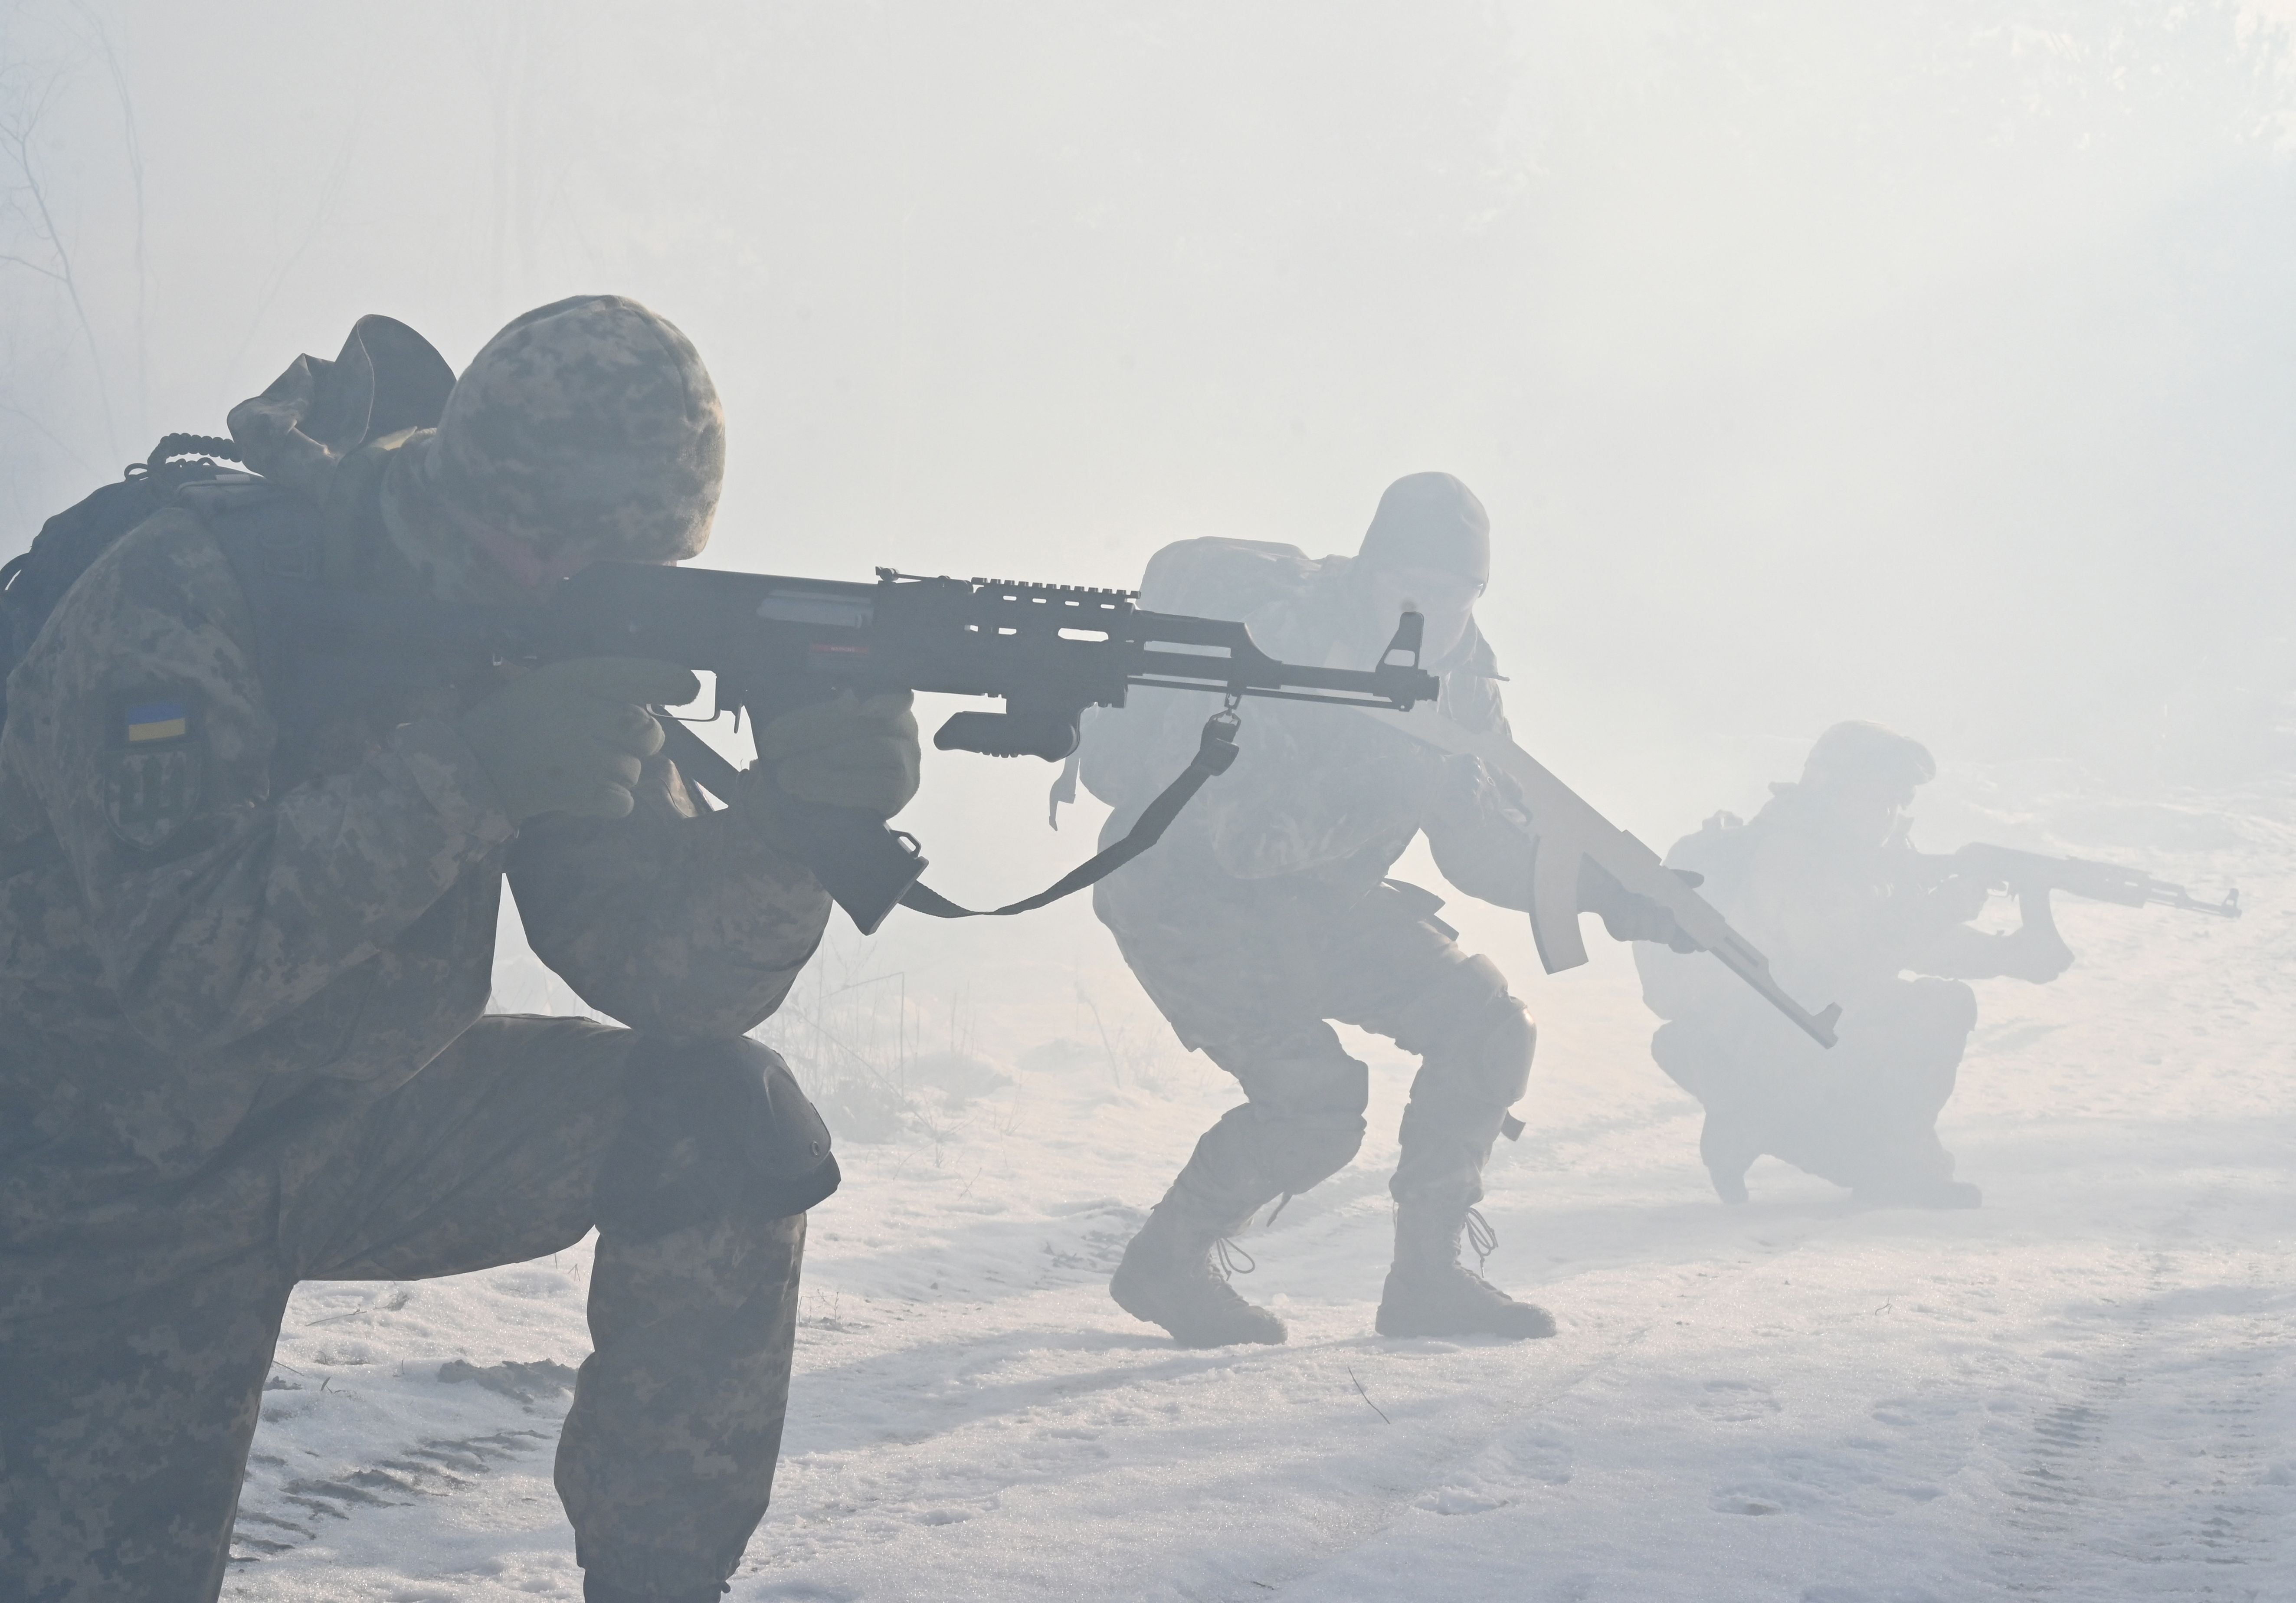 Ukrainian Territorial Defence Forces take part in a military exercise near Kiev on December 25, 2021